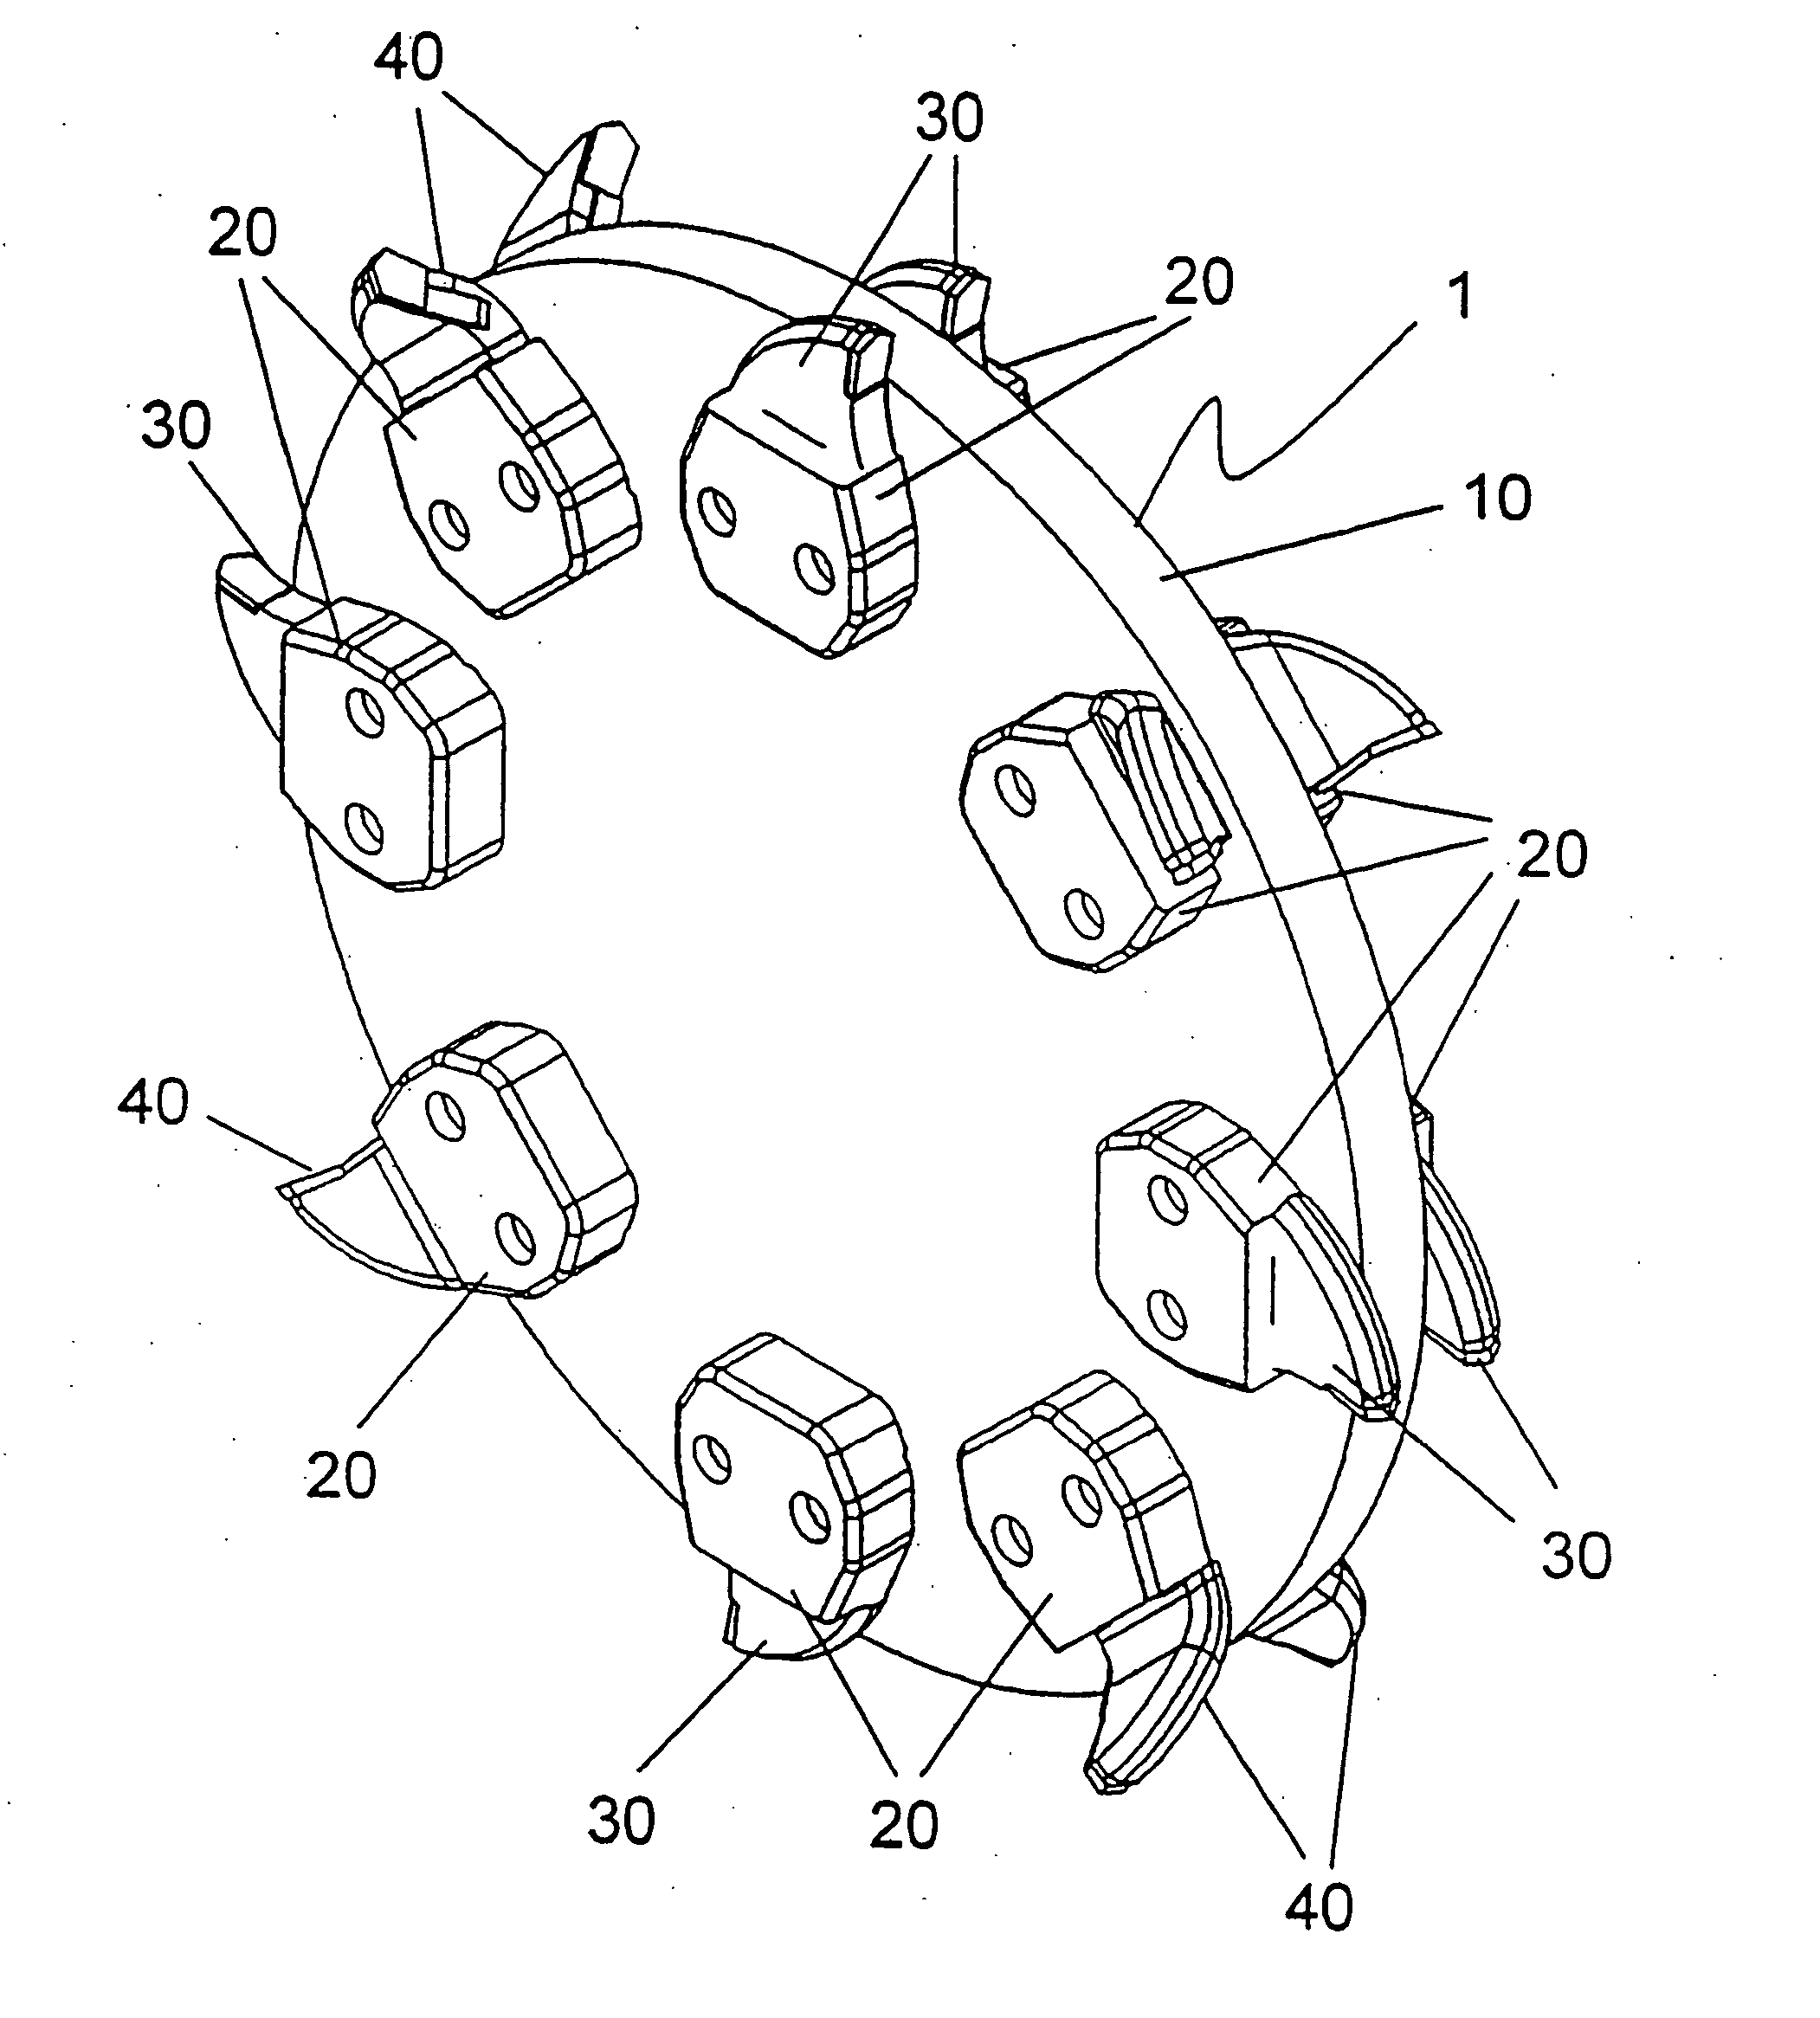 Stump cutter device and cutter insert unit for the stump cutter device